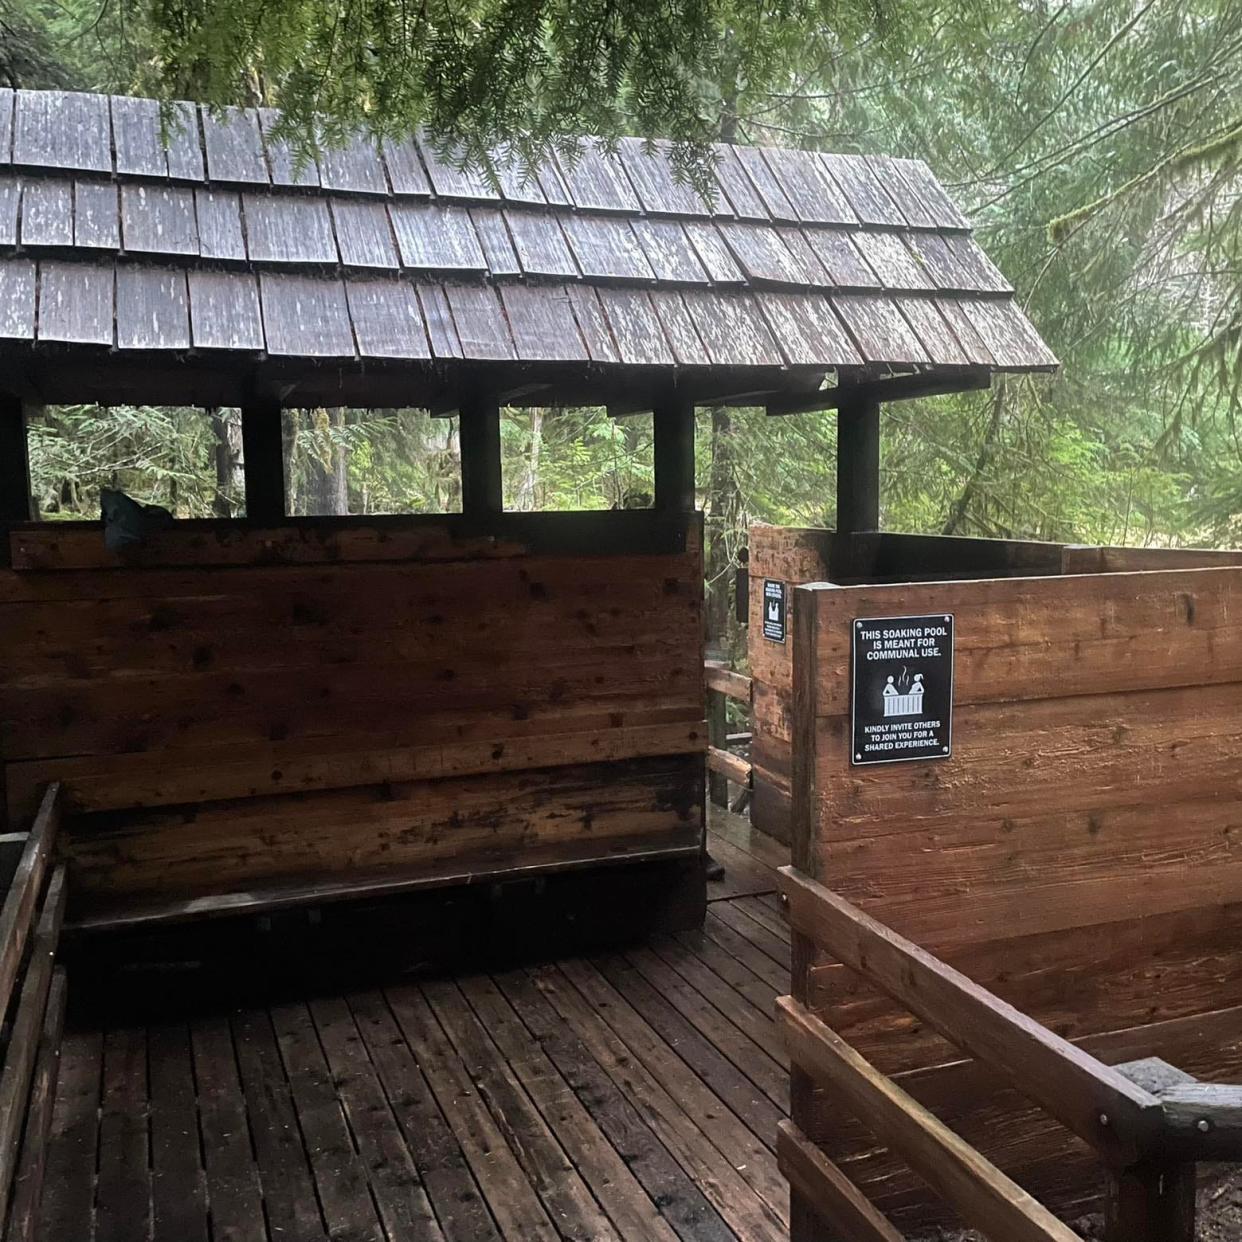 Bagby Hot Springs is open and accessible for the first time since 2020, but the private bath house remains closed.